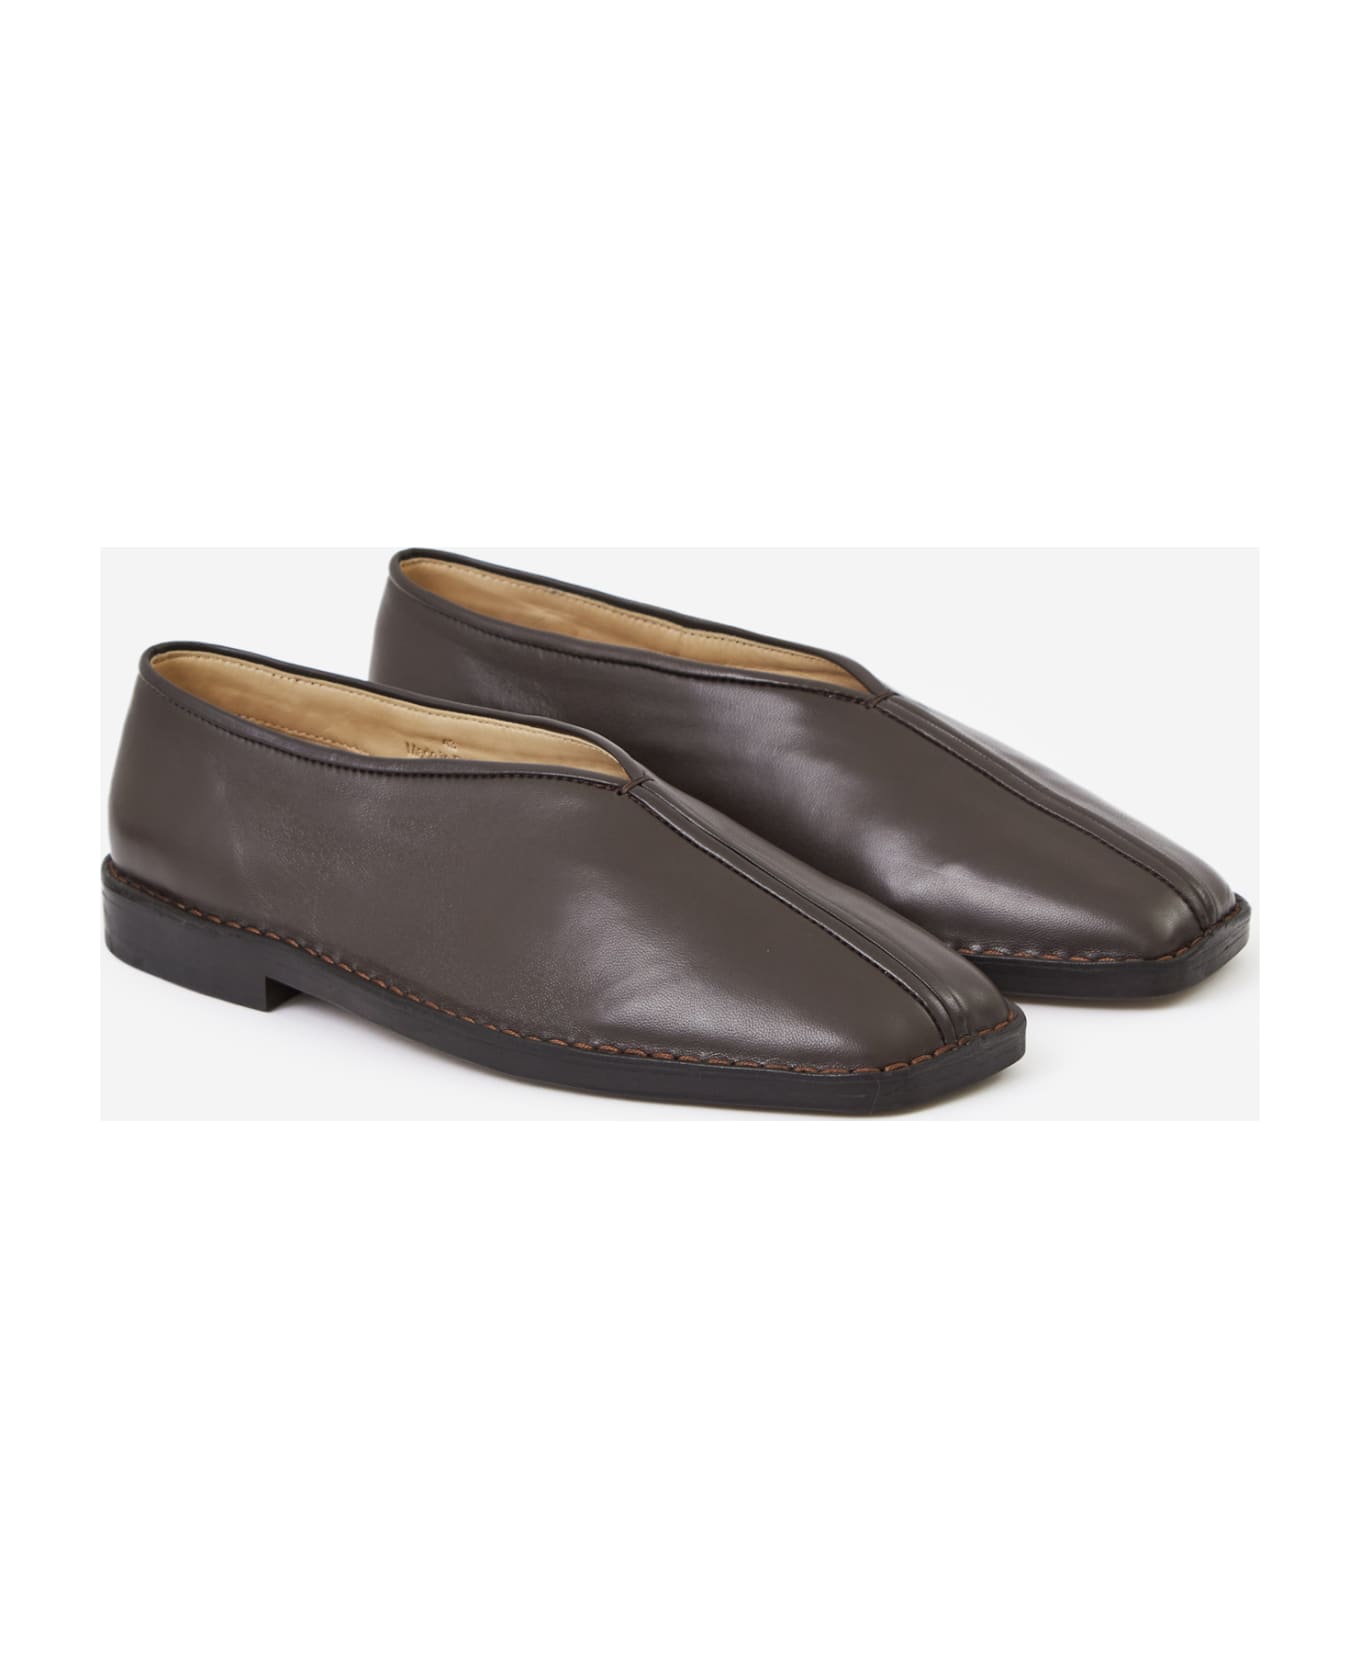 Lemaire Flat Piped Slippers Shoes - brown